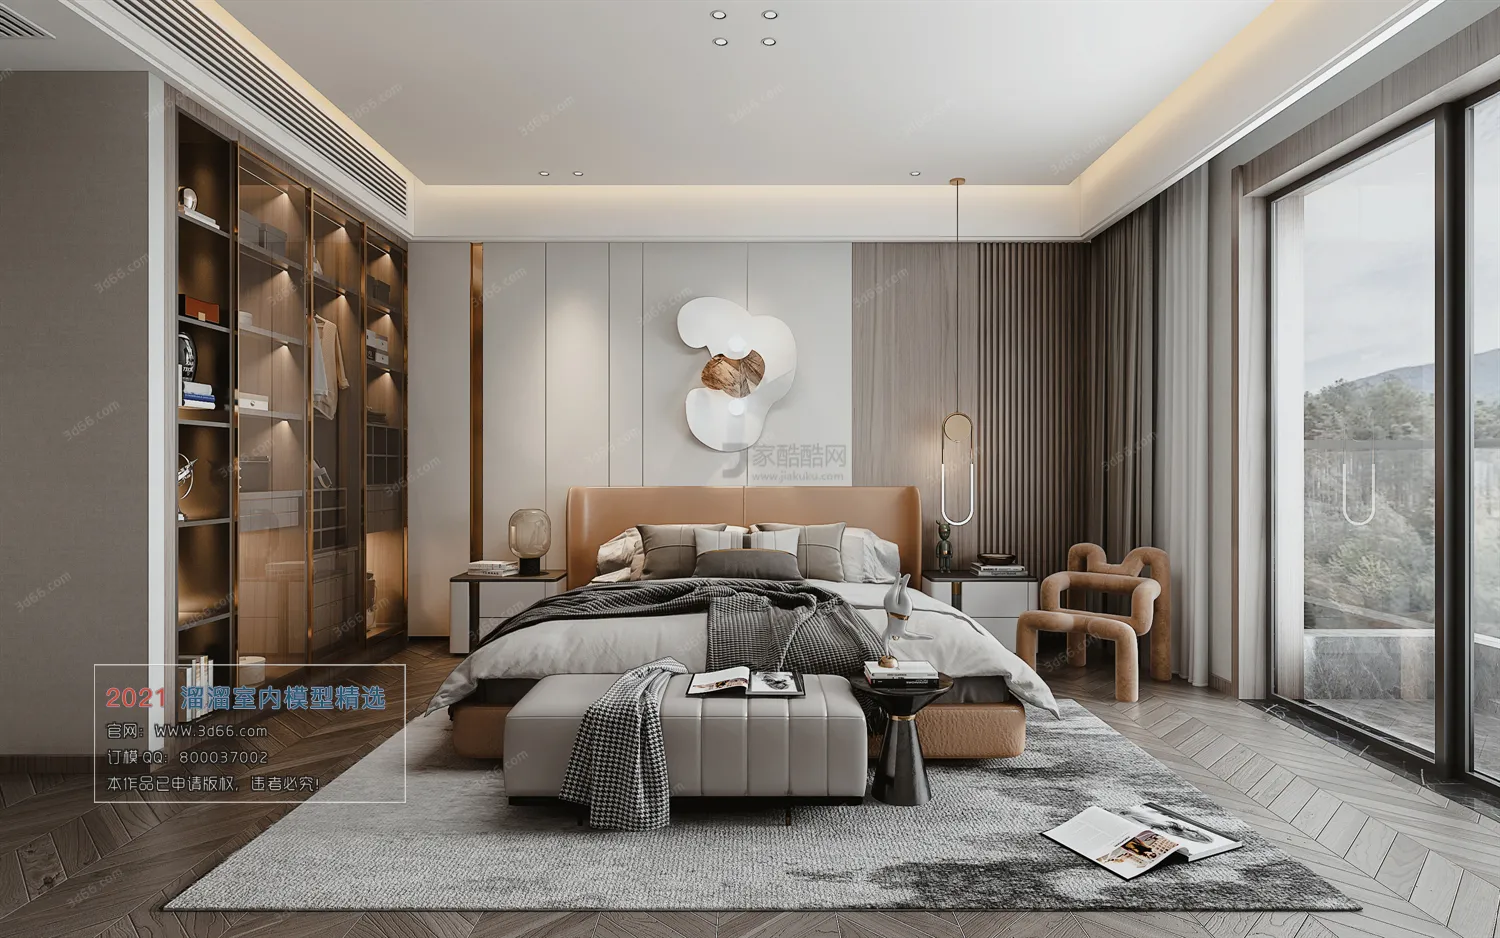 BEDROOM – A026-Modern style-Vray model